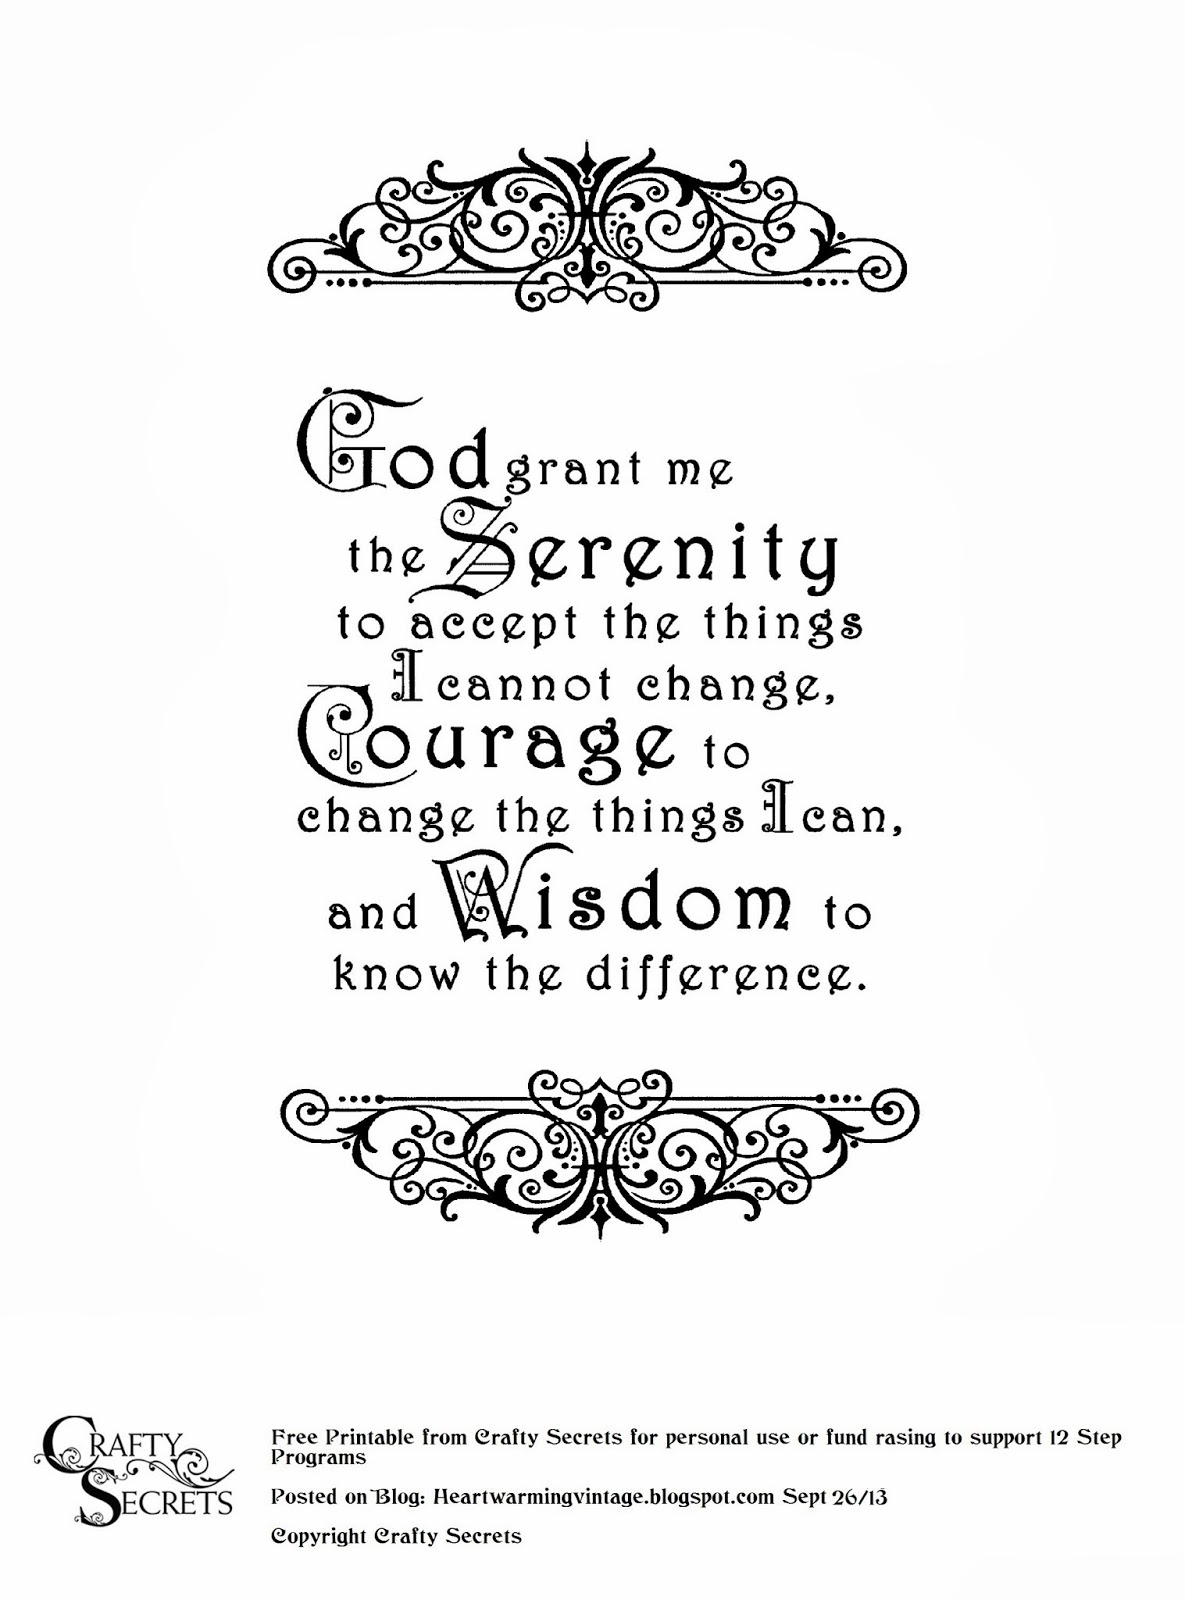 Crafty Secrets Heartwarming Vintage Ideas And Tips Free Serenity Prayer Printable And My Dad s GA Story